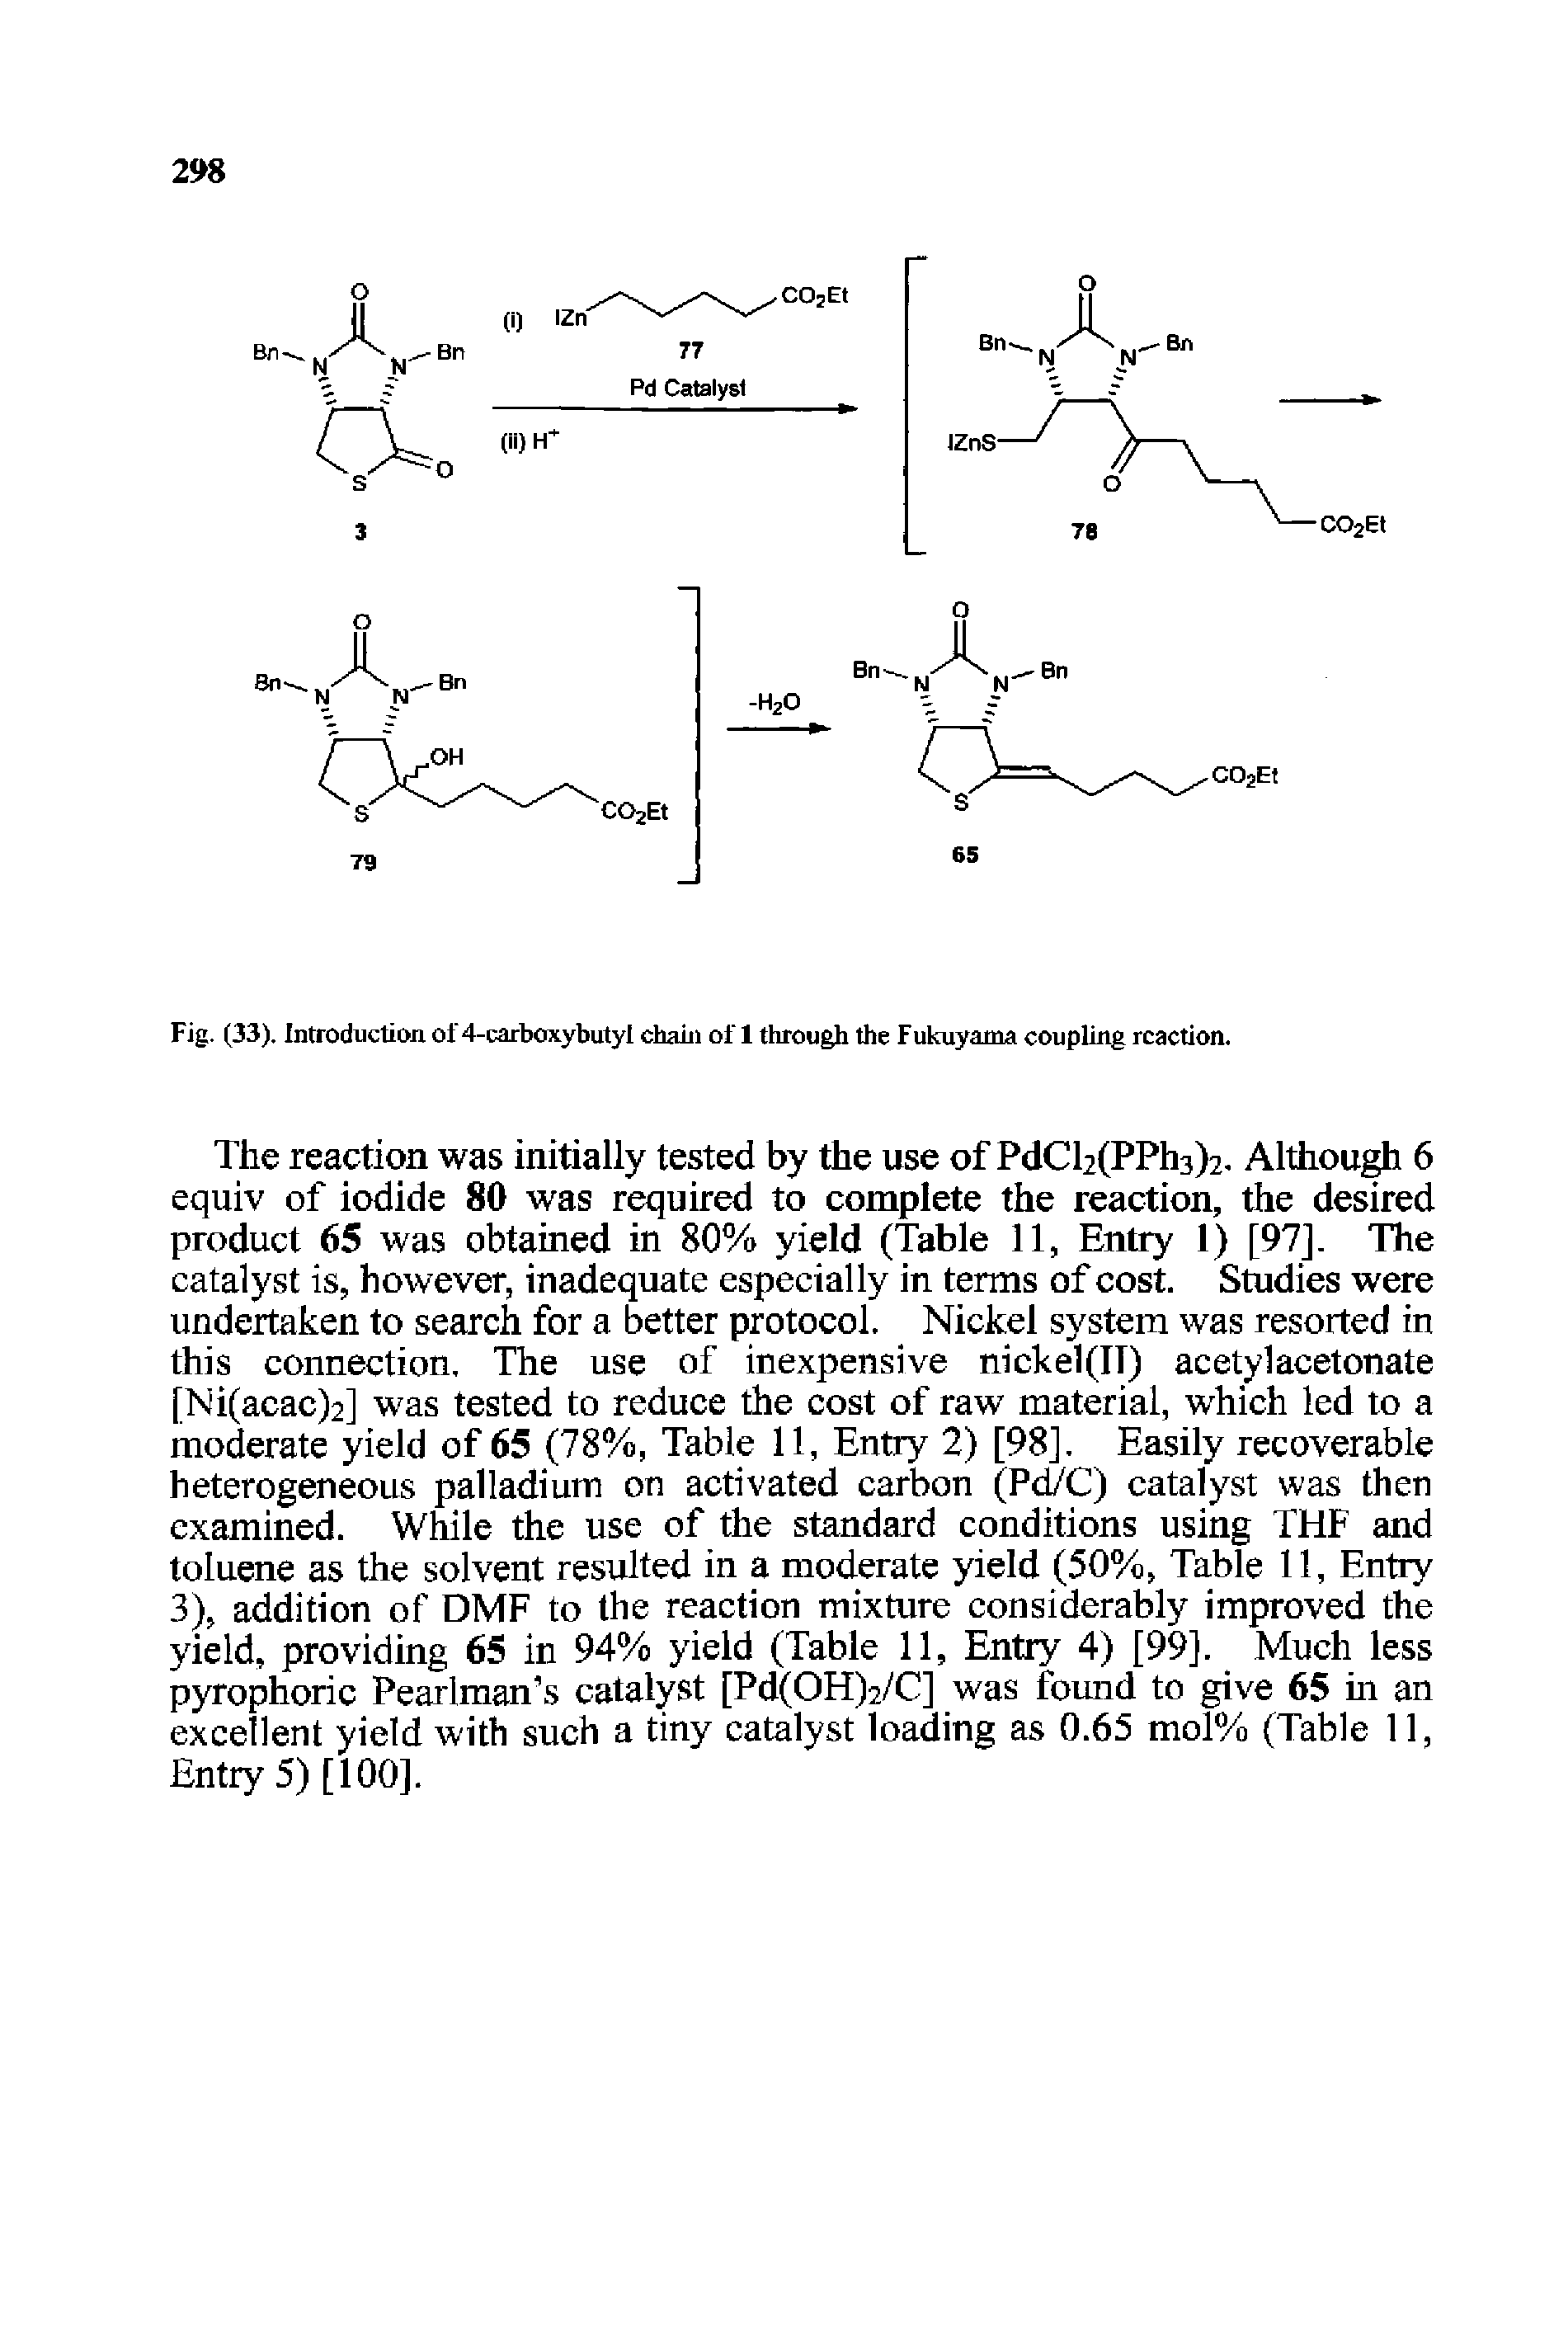 Fig. (33). Introduction of 4-carboxybutyl chani of 1 through the Fukuyama coupling reaction.